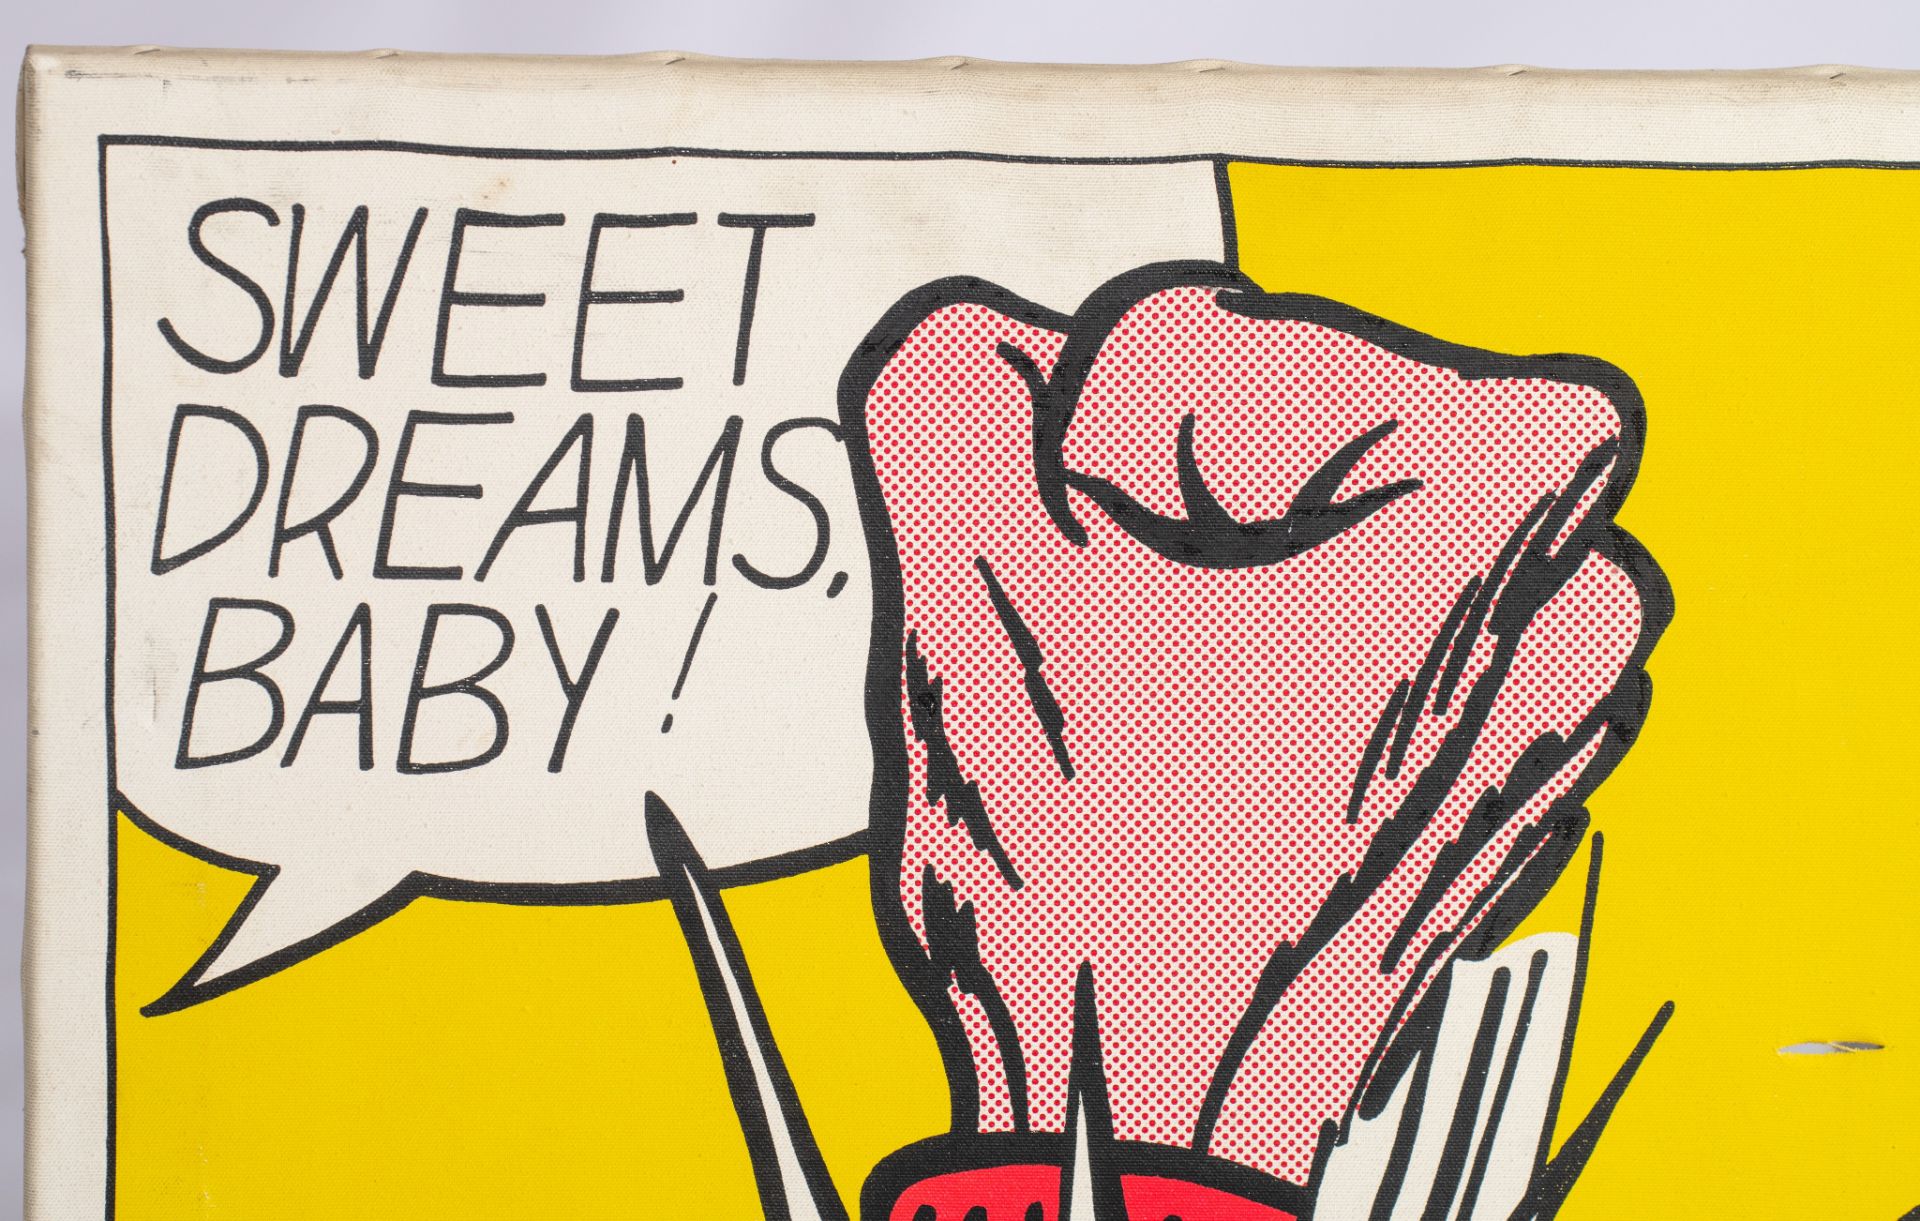 Roy Lichtenstein (1923-1997), 'Sweet dreams baby!', silkscreen on canvas, 'Limited Pirate Edition' ( - Image 6 of 9